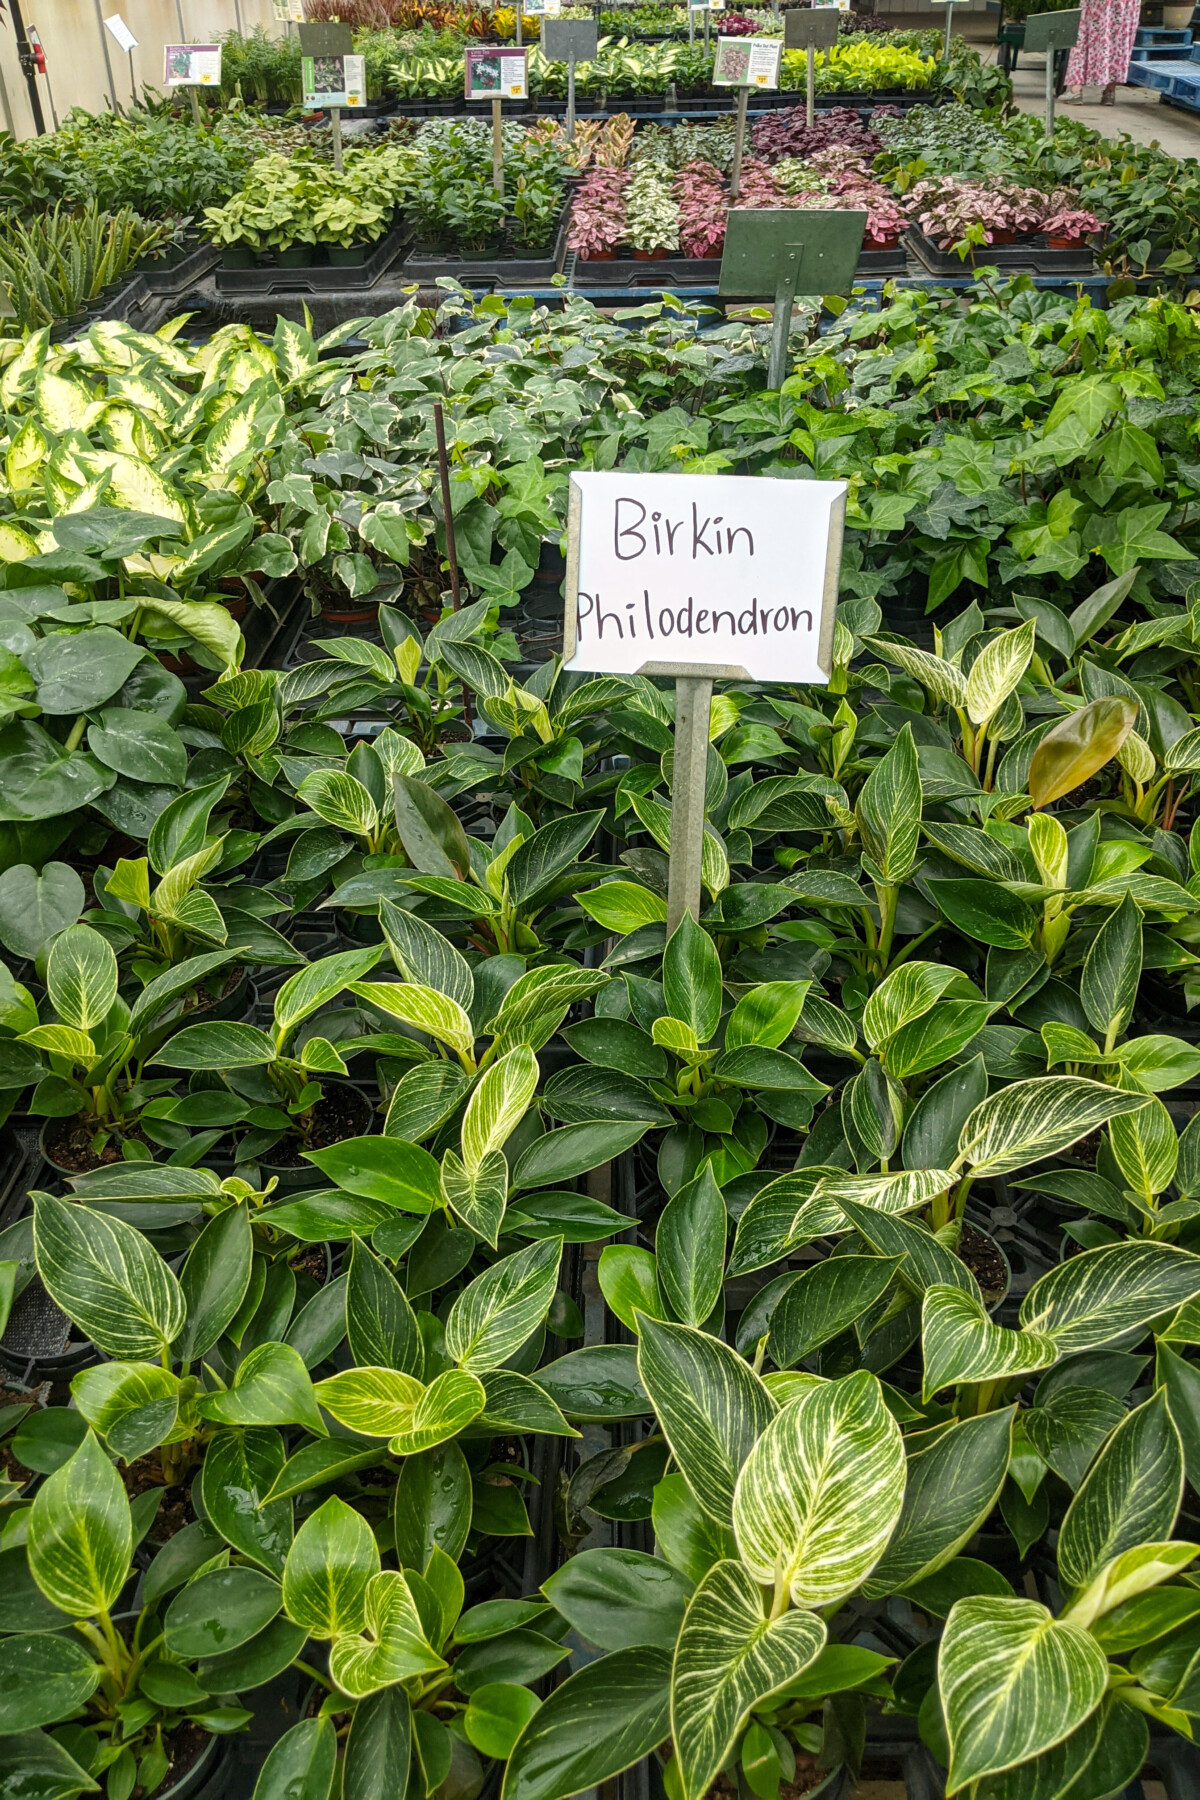 Many potted birkin philodendrons in a greenhouse